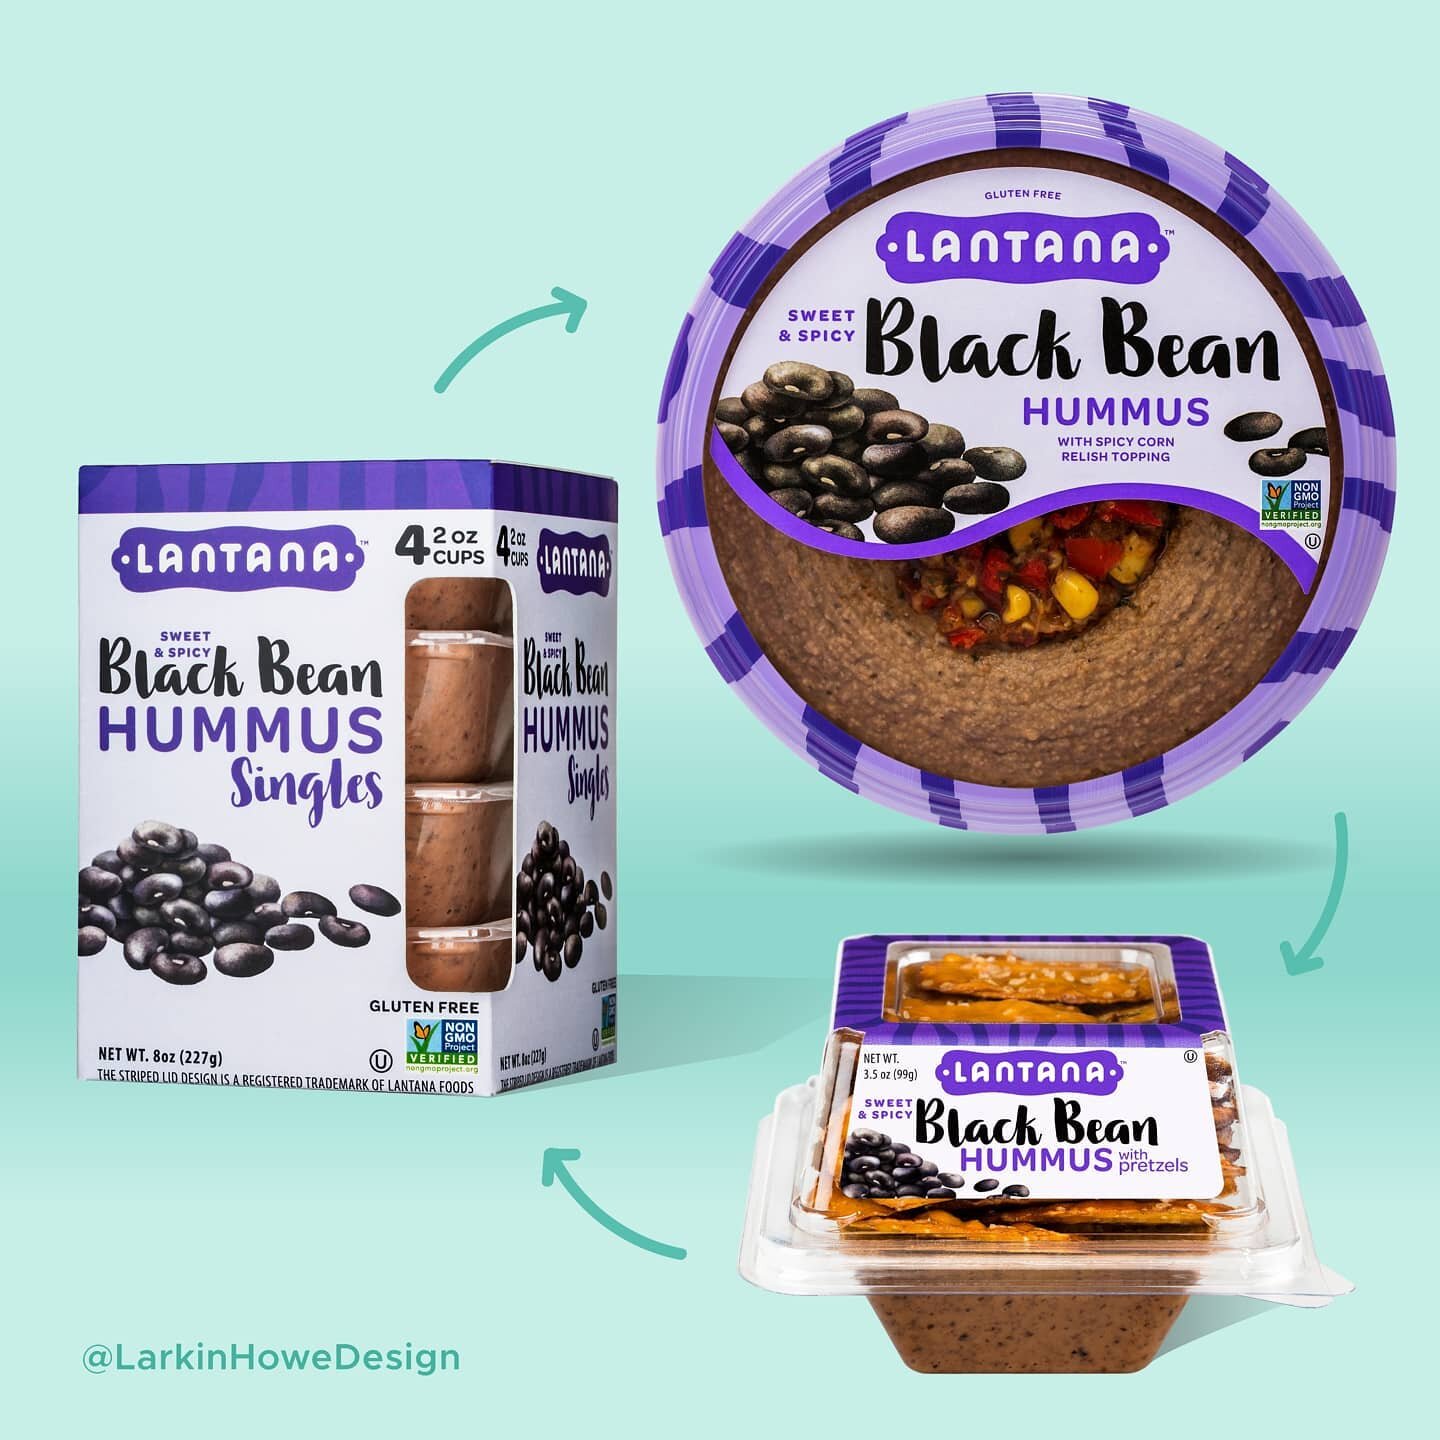 Brand and callout consistency across packaging is so important for #cpg products! 

Here is an example from a previous role I had at Lantana Foods. The basic 10 oz tub of hummus was final and the challenge was designing the same flavor for smaller fo